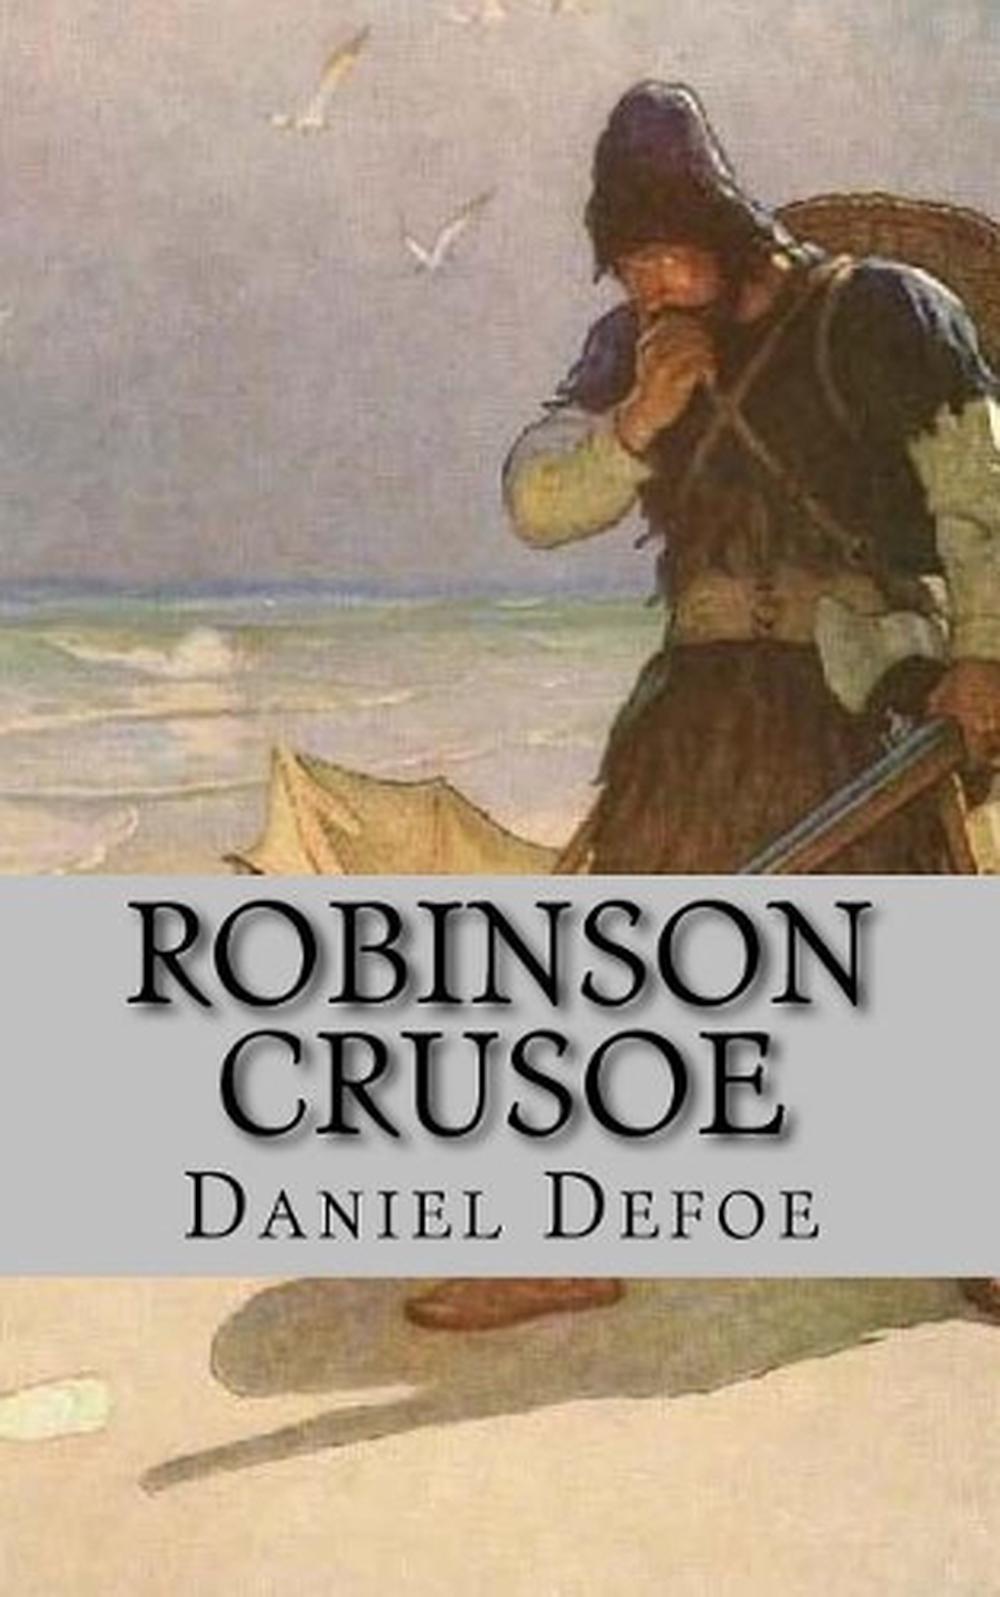 book review for robinson crusoe